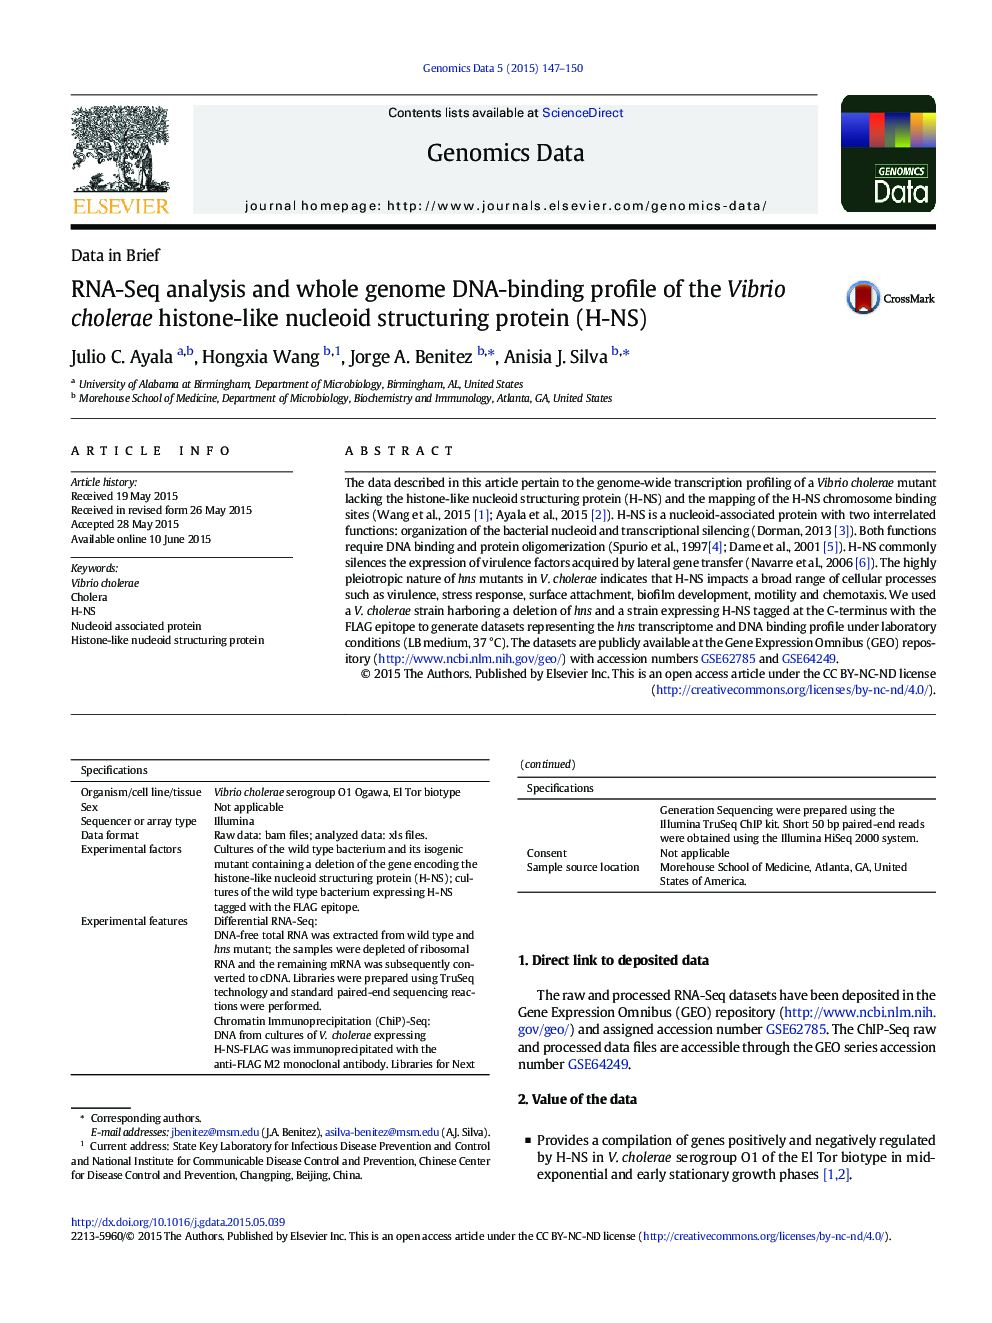 RNA-Seq analysis and whole genome DNA-binding profile of the Vibrio cholerae histone-like nucleoid structuring protein (H-NS)